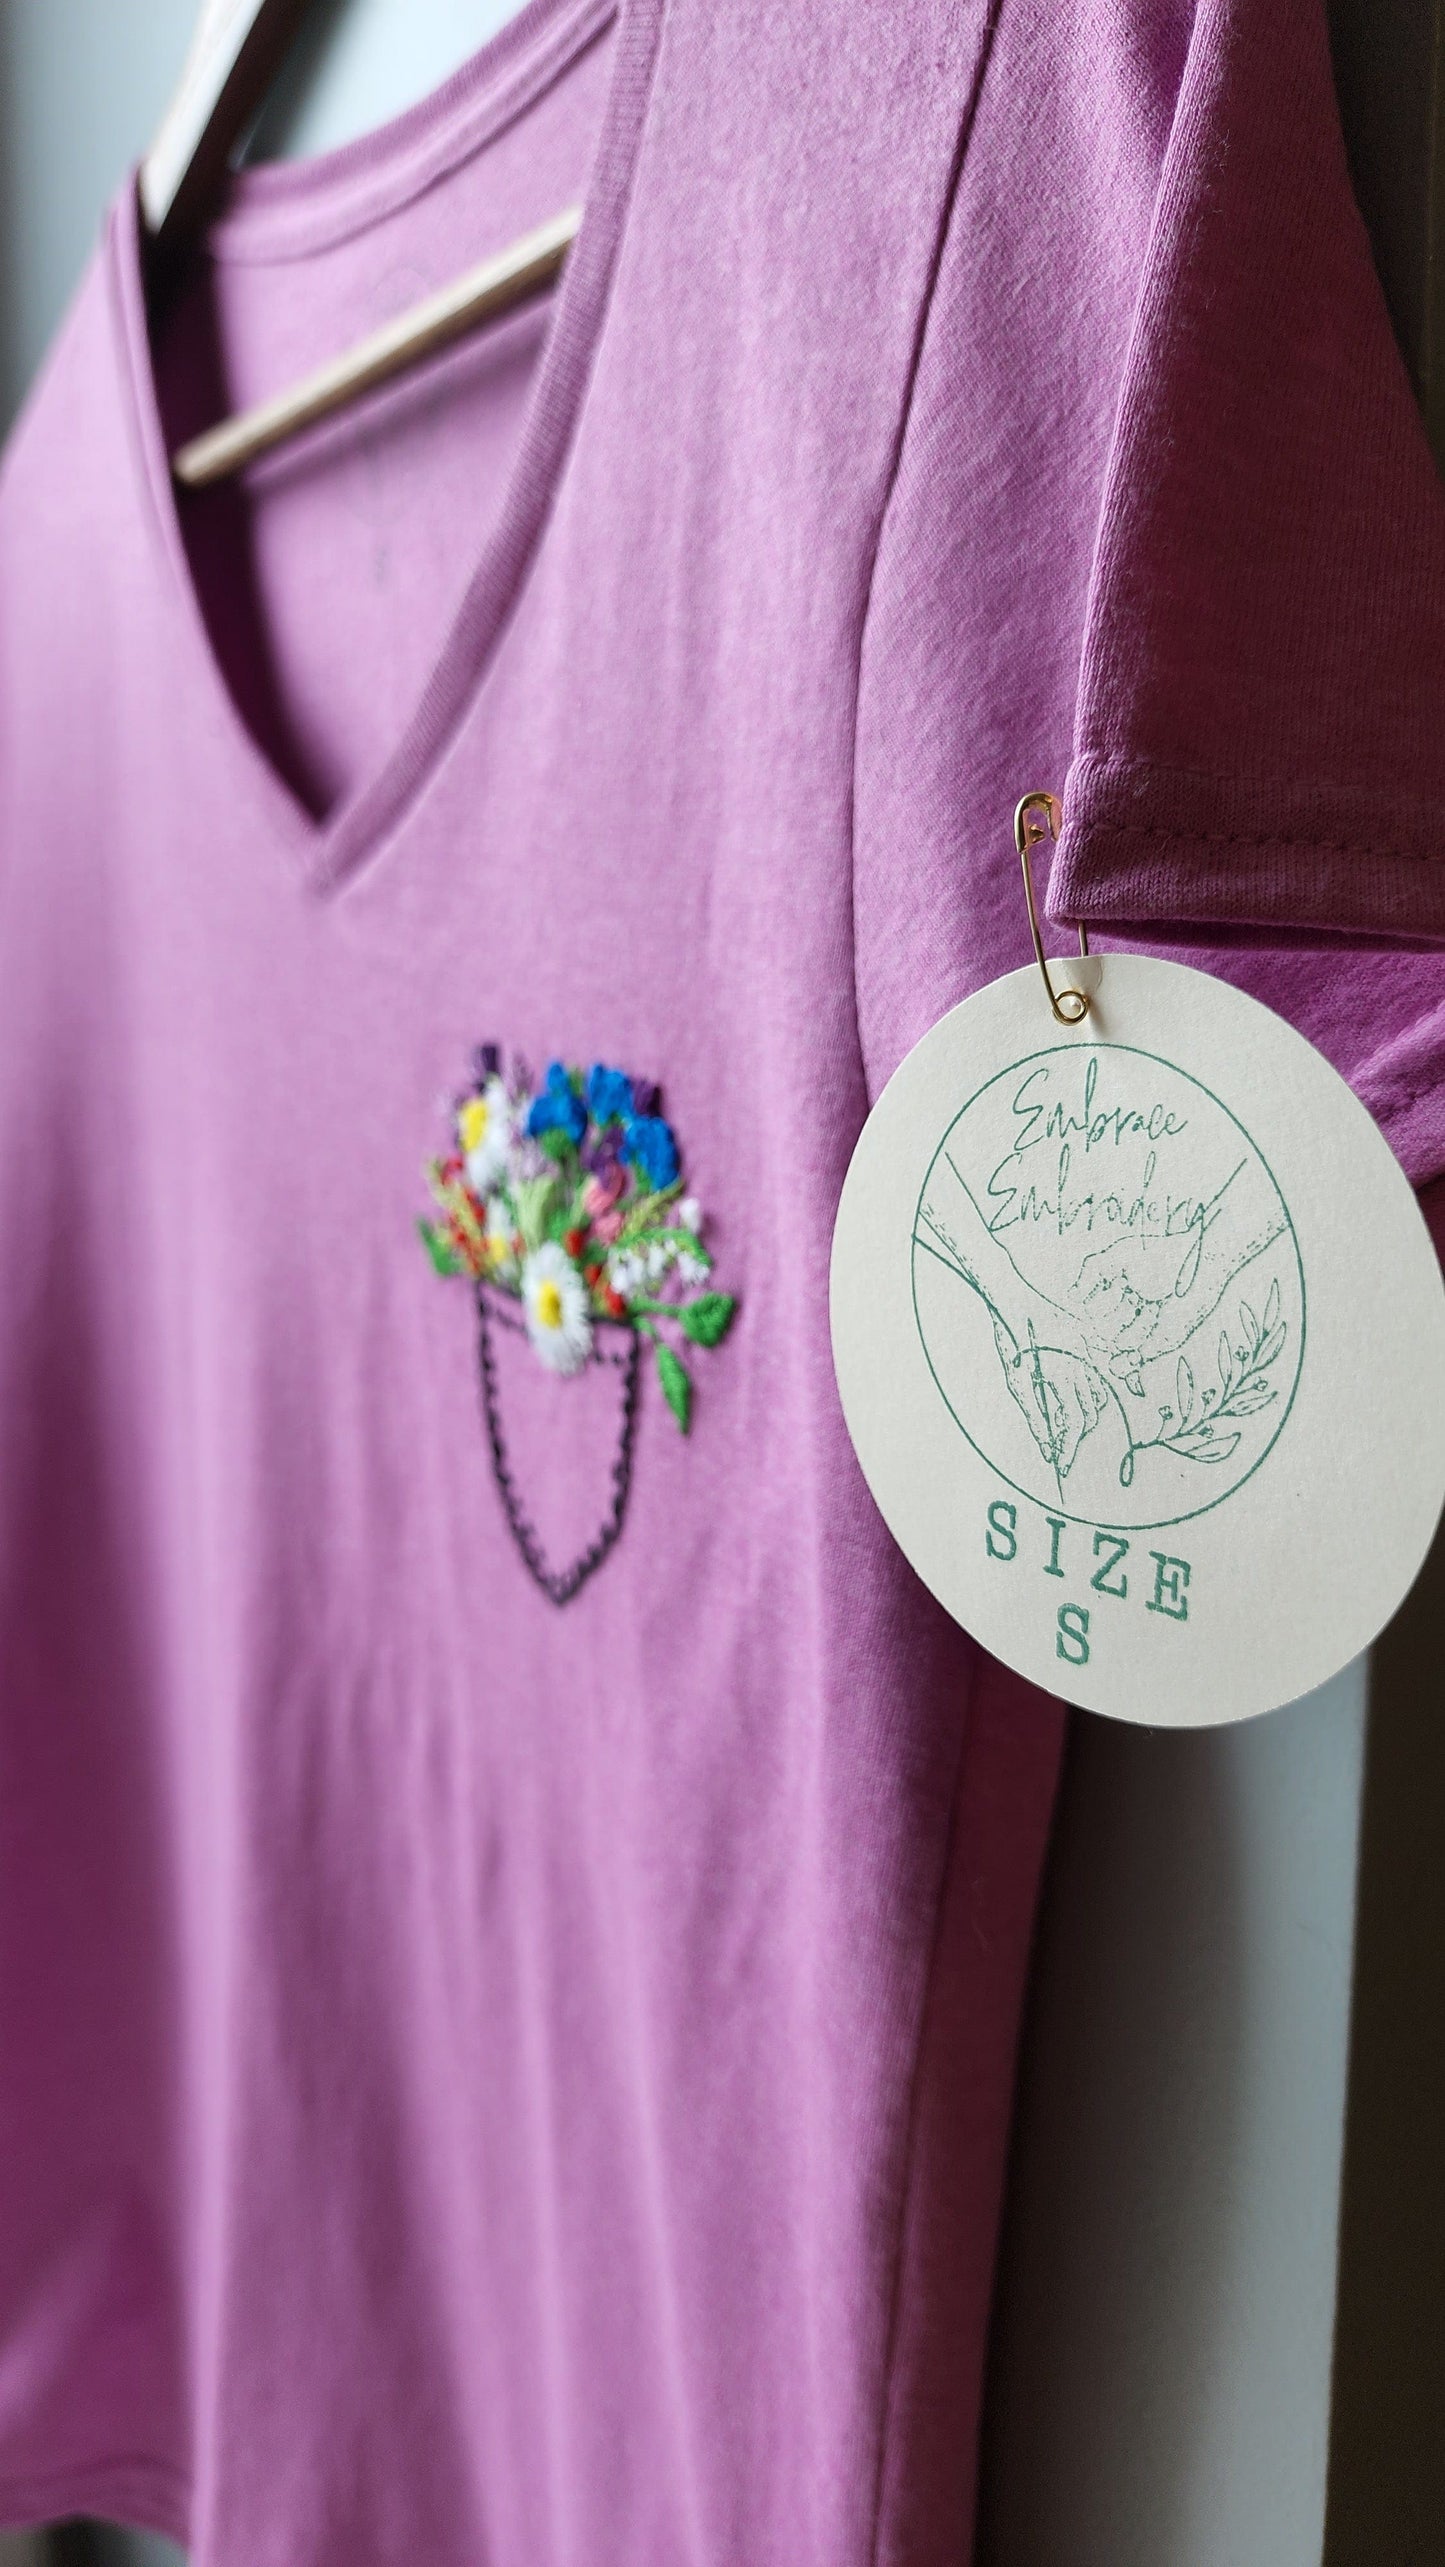 Embrace Embroidery Hand Embroidered T-Shirt Hand Embroidered Pocket Full of Wild Flowers